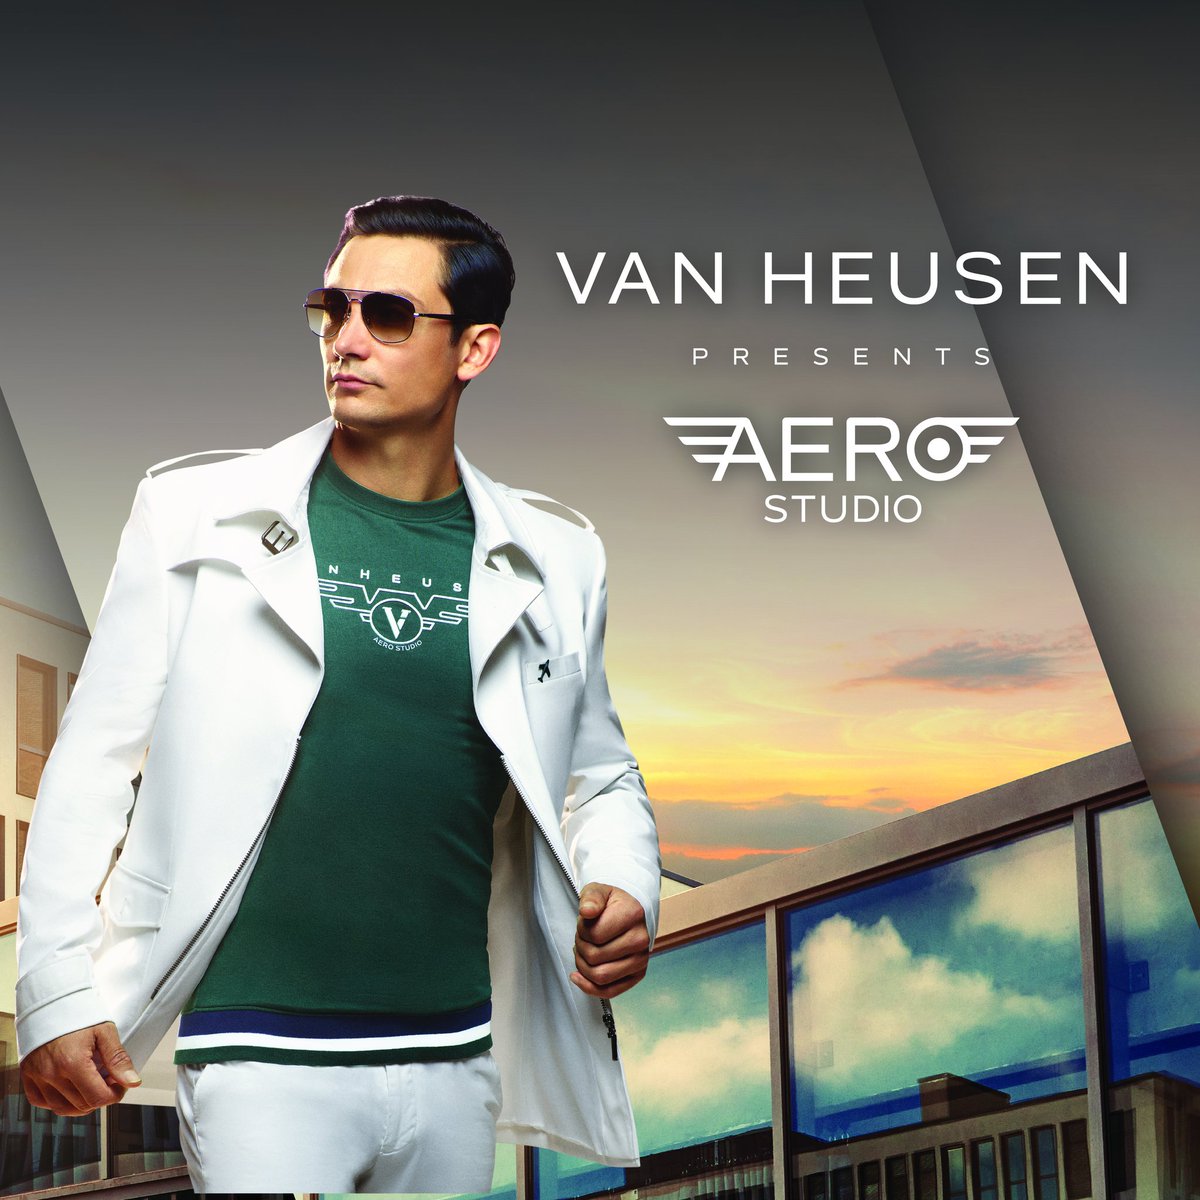 Aim high, the world is yours to conquer. Presenting the Aviator ✈️ A style statement for the confident, the relentless, and the determined. Explore now at your nearest Van Heusen store. #VanHeusen #AeroStudio